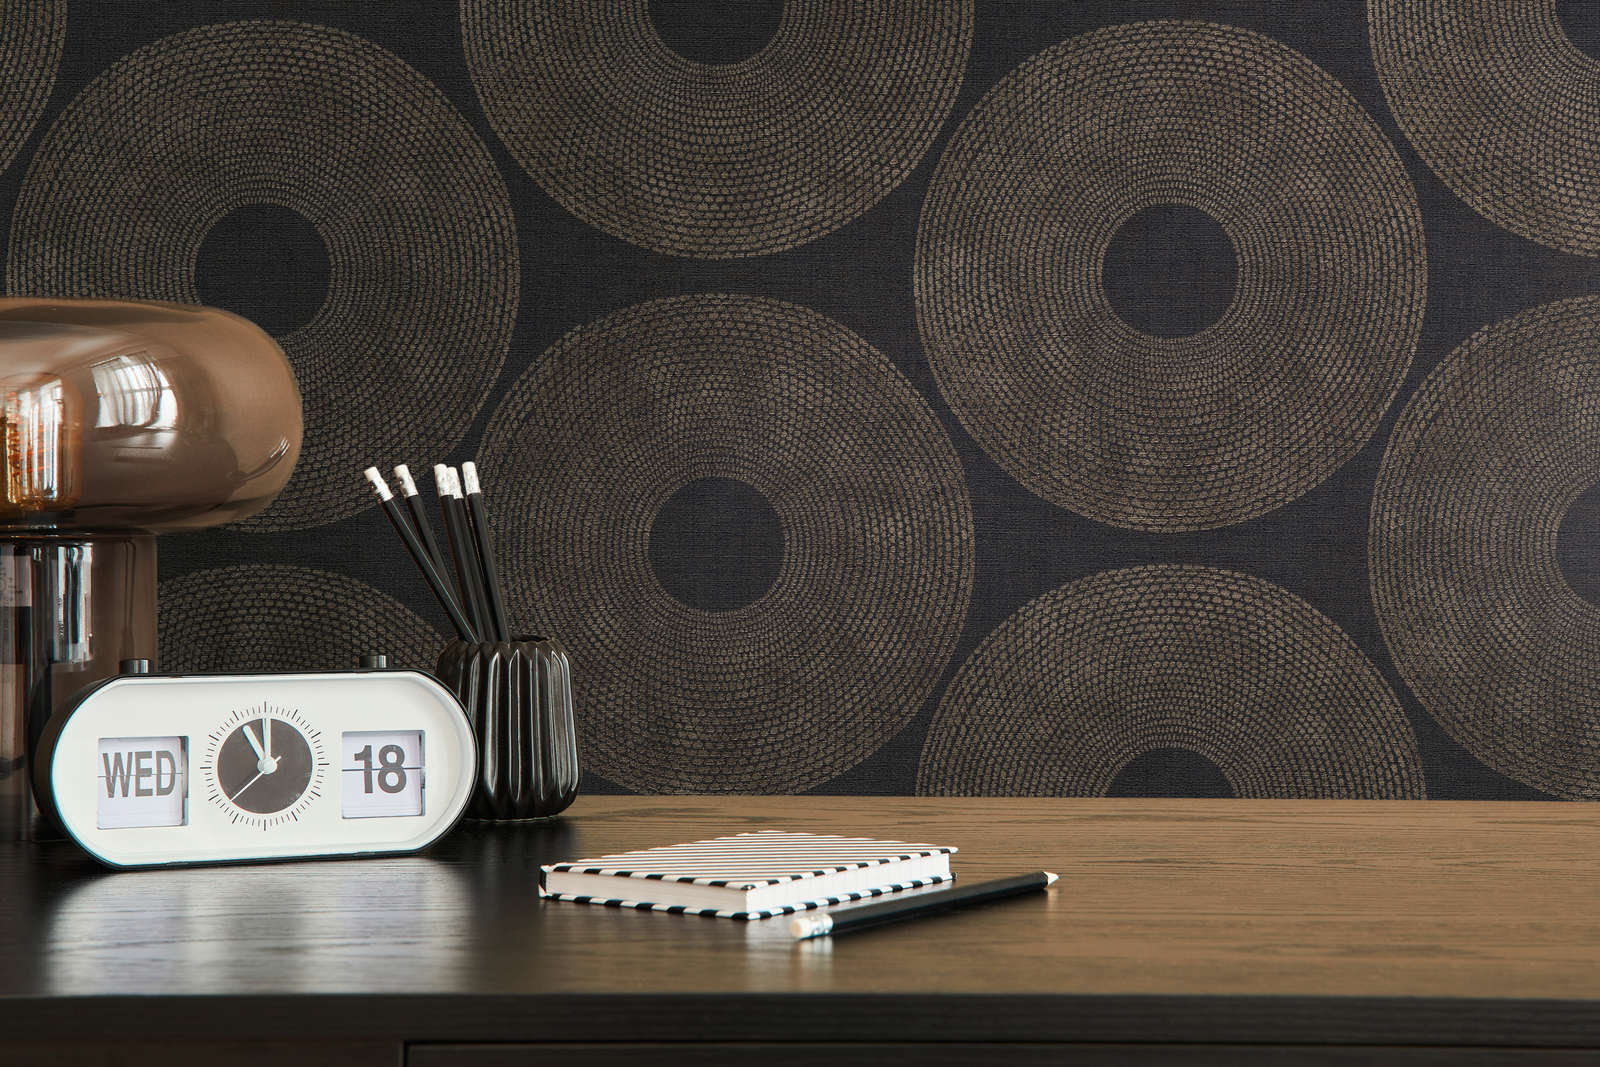             Ethno wallpaper circles with structure design - grey, brown
        